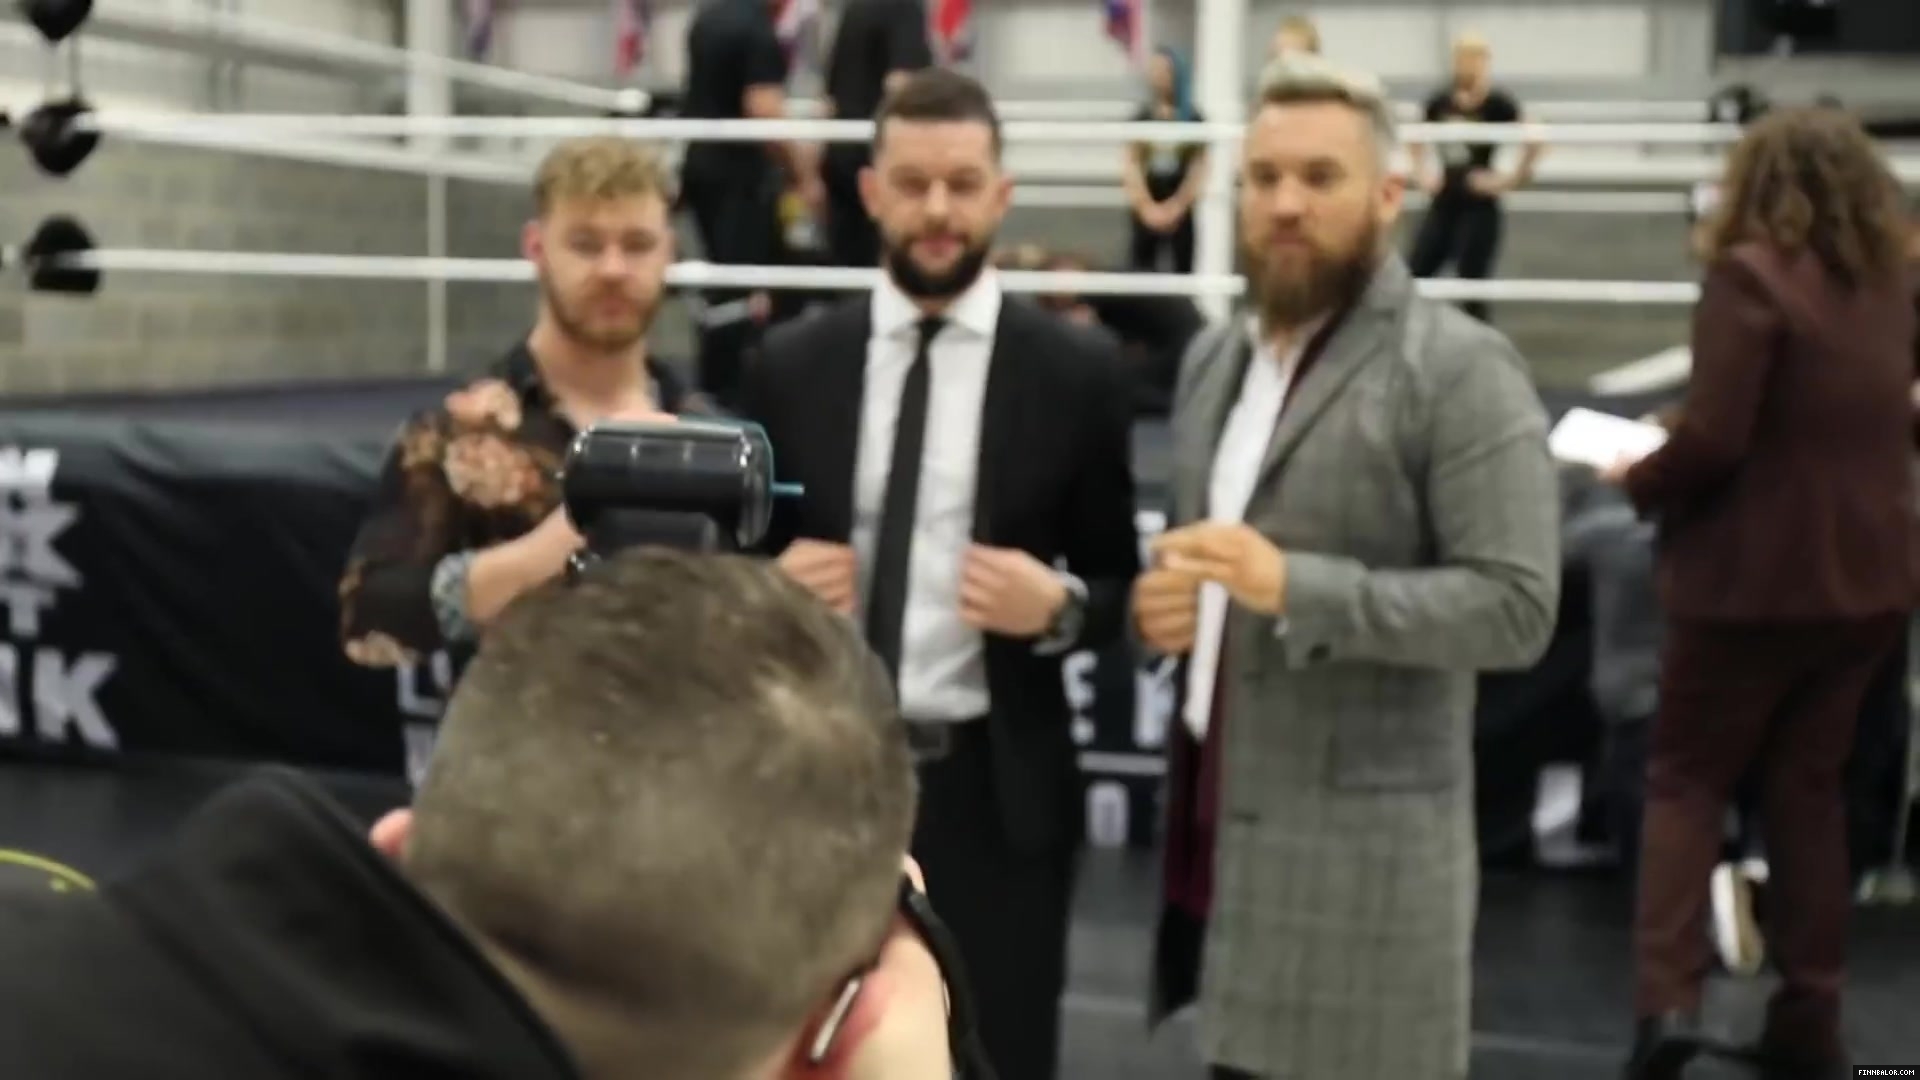 WWE_Superstar_FINN_BALOR_joins_MOUSTACHE_MOUNTAIN_at_the_opening_of_the_NXT_UK_PC_031.jpg